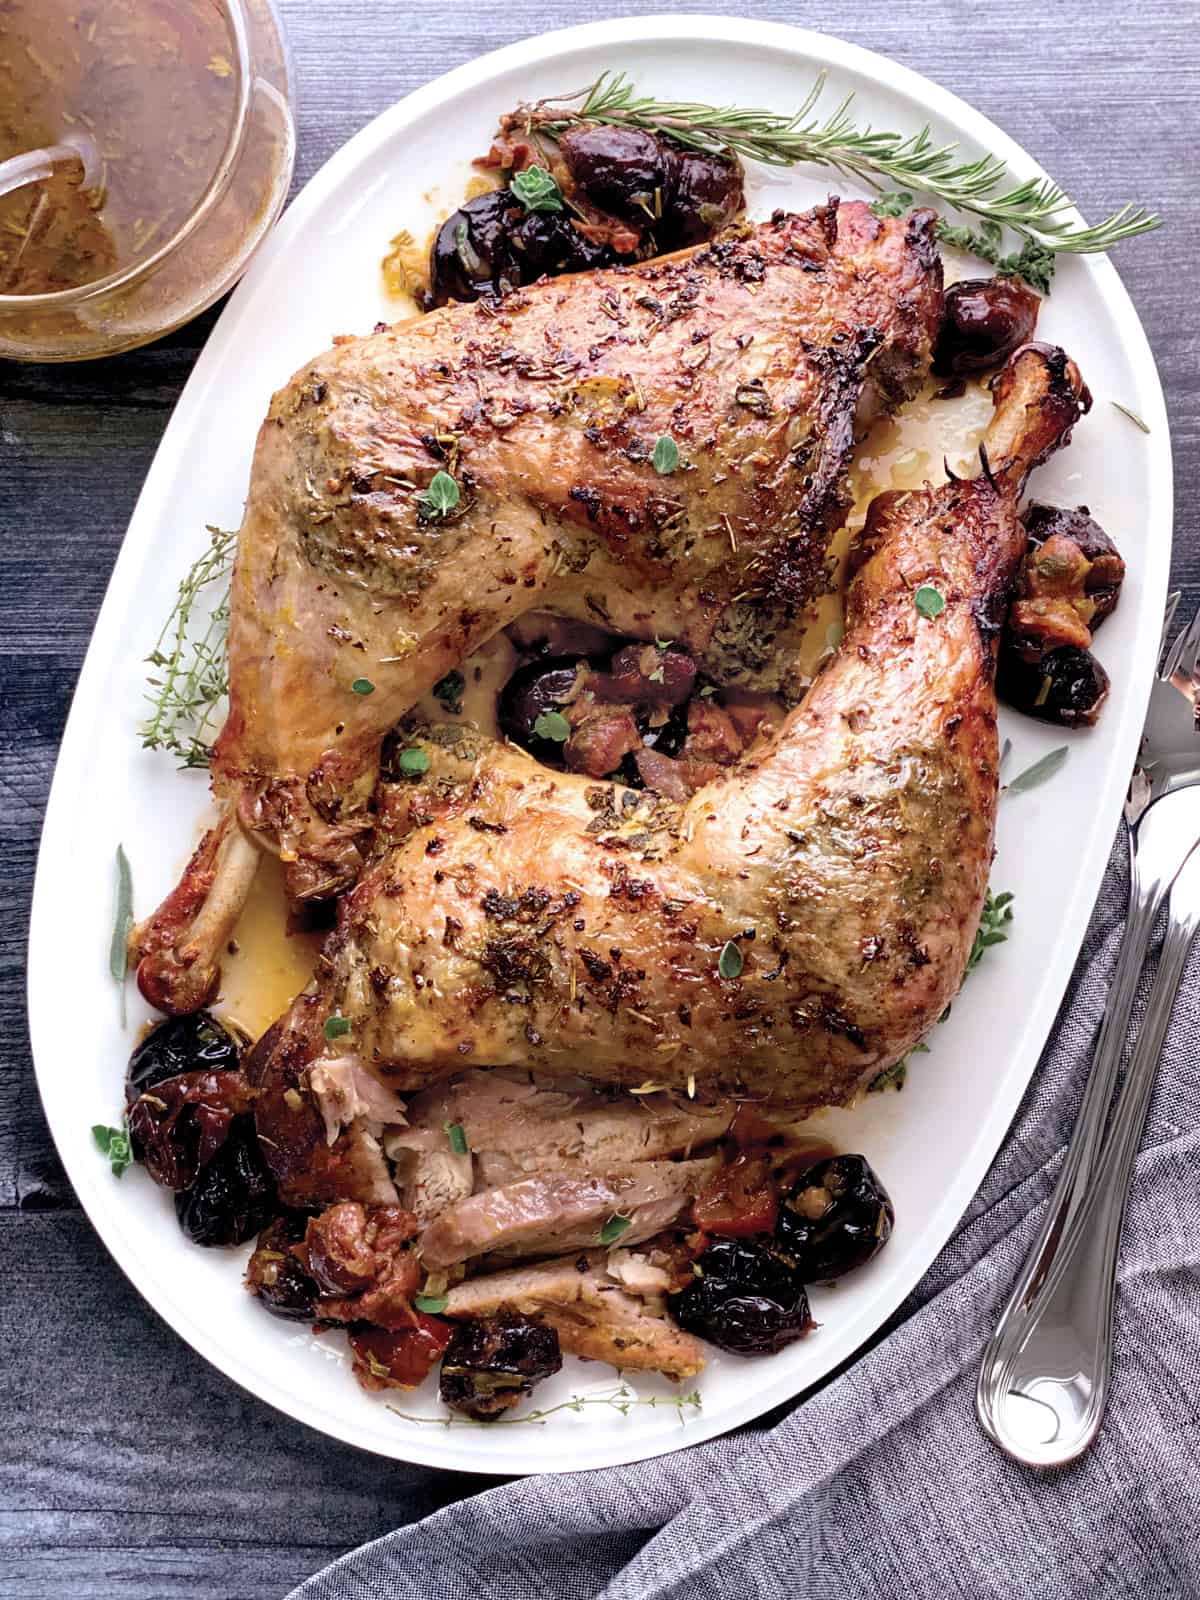 Two turkey thighs with drumsticks on a platter with herbs and dry fruit, and gravy. Serving utensils are on one side and a bowl with gravy on the other.